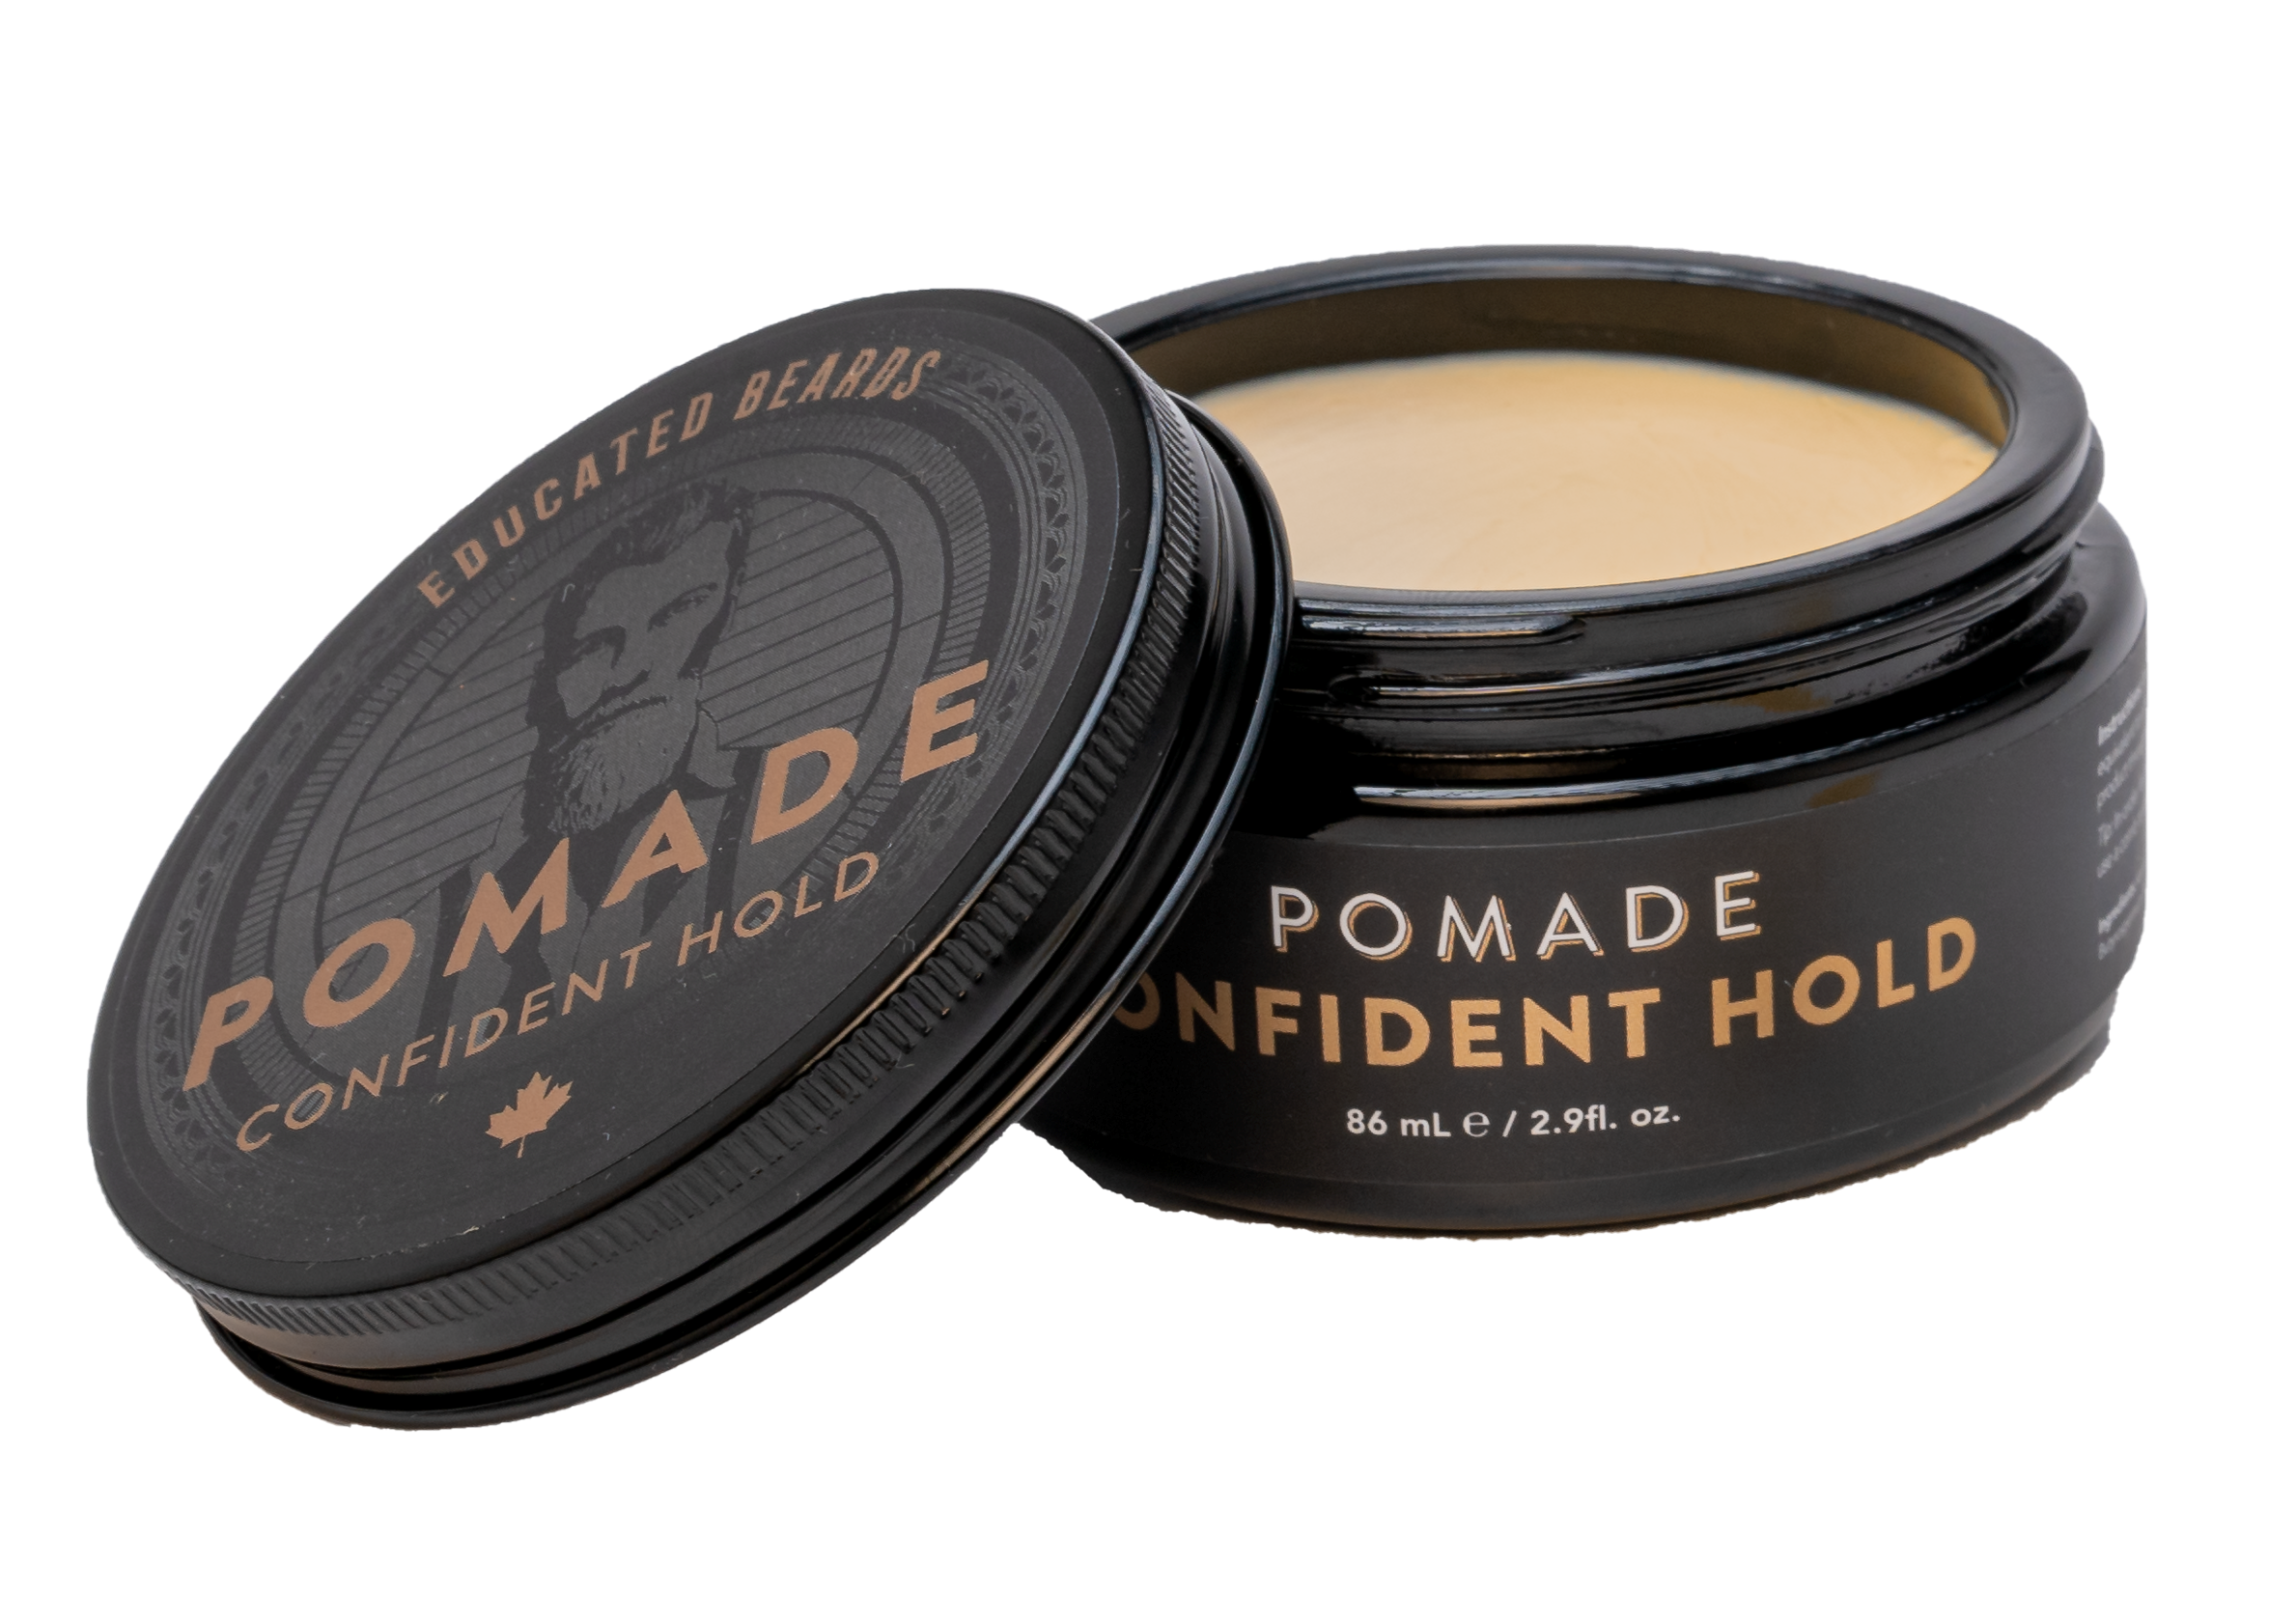 POMMADE POUR LES CHEVEUX 86ML EDUCATED BEARDS